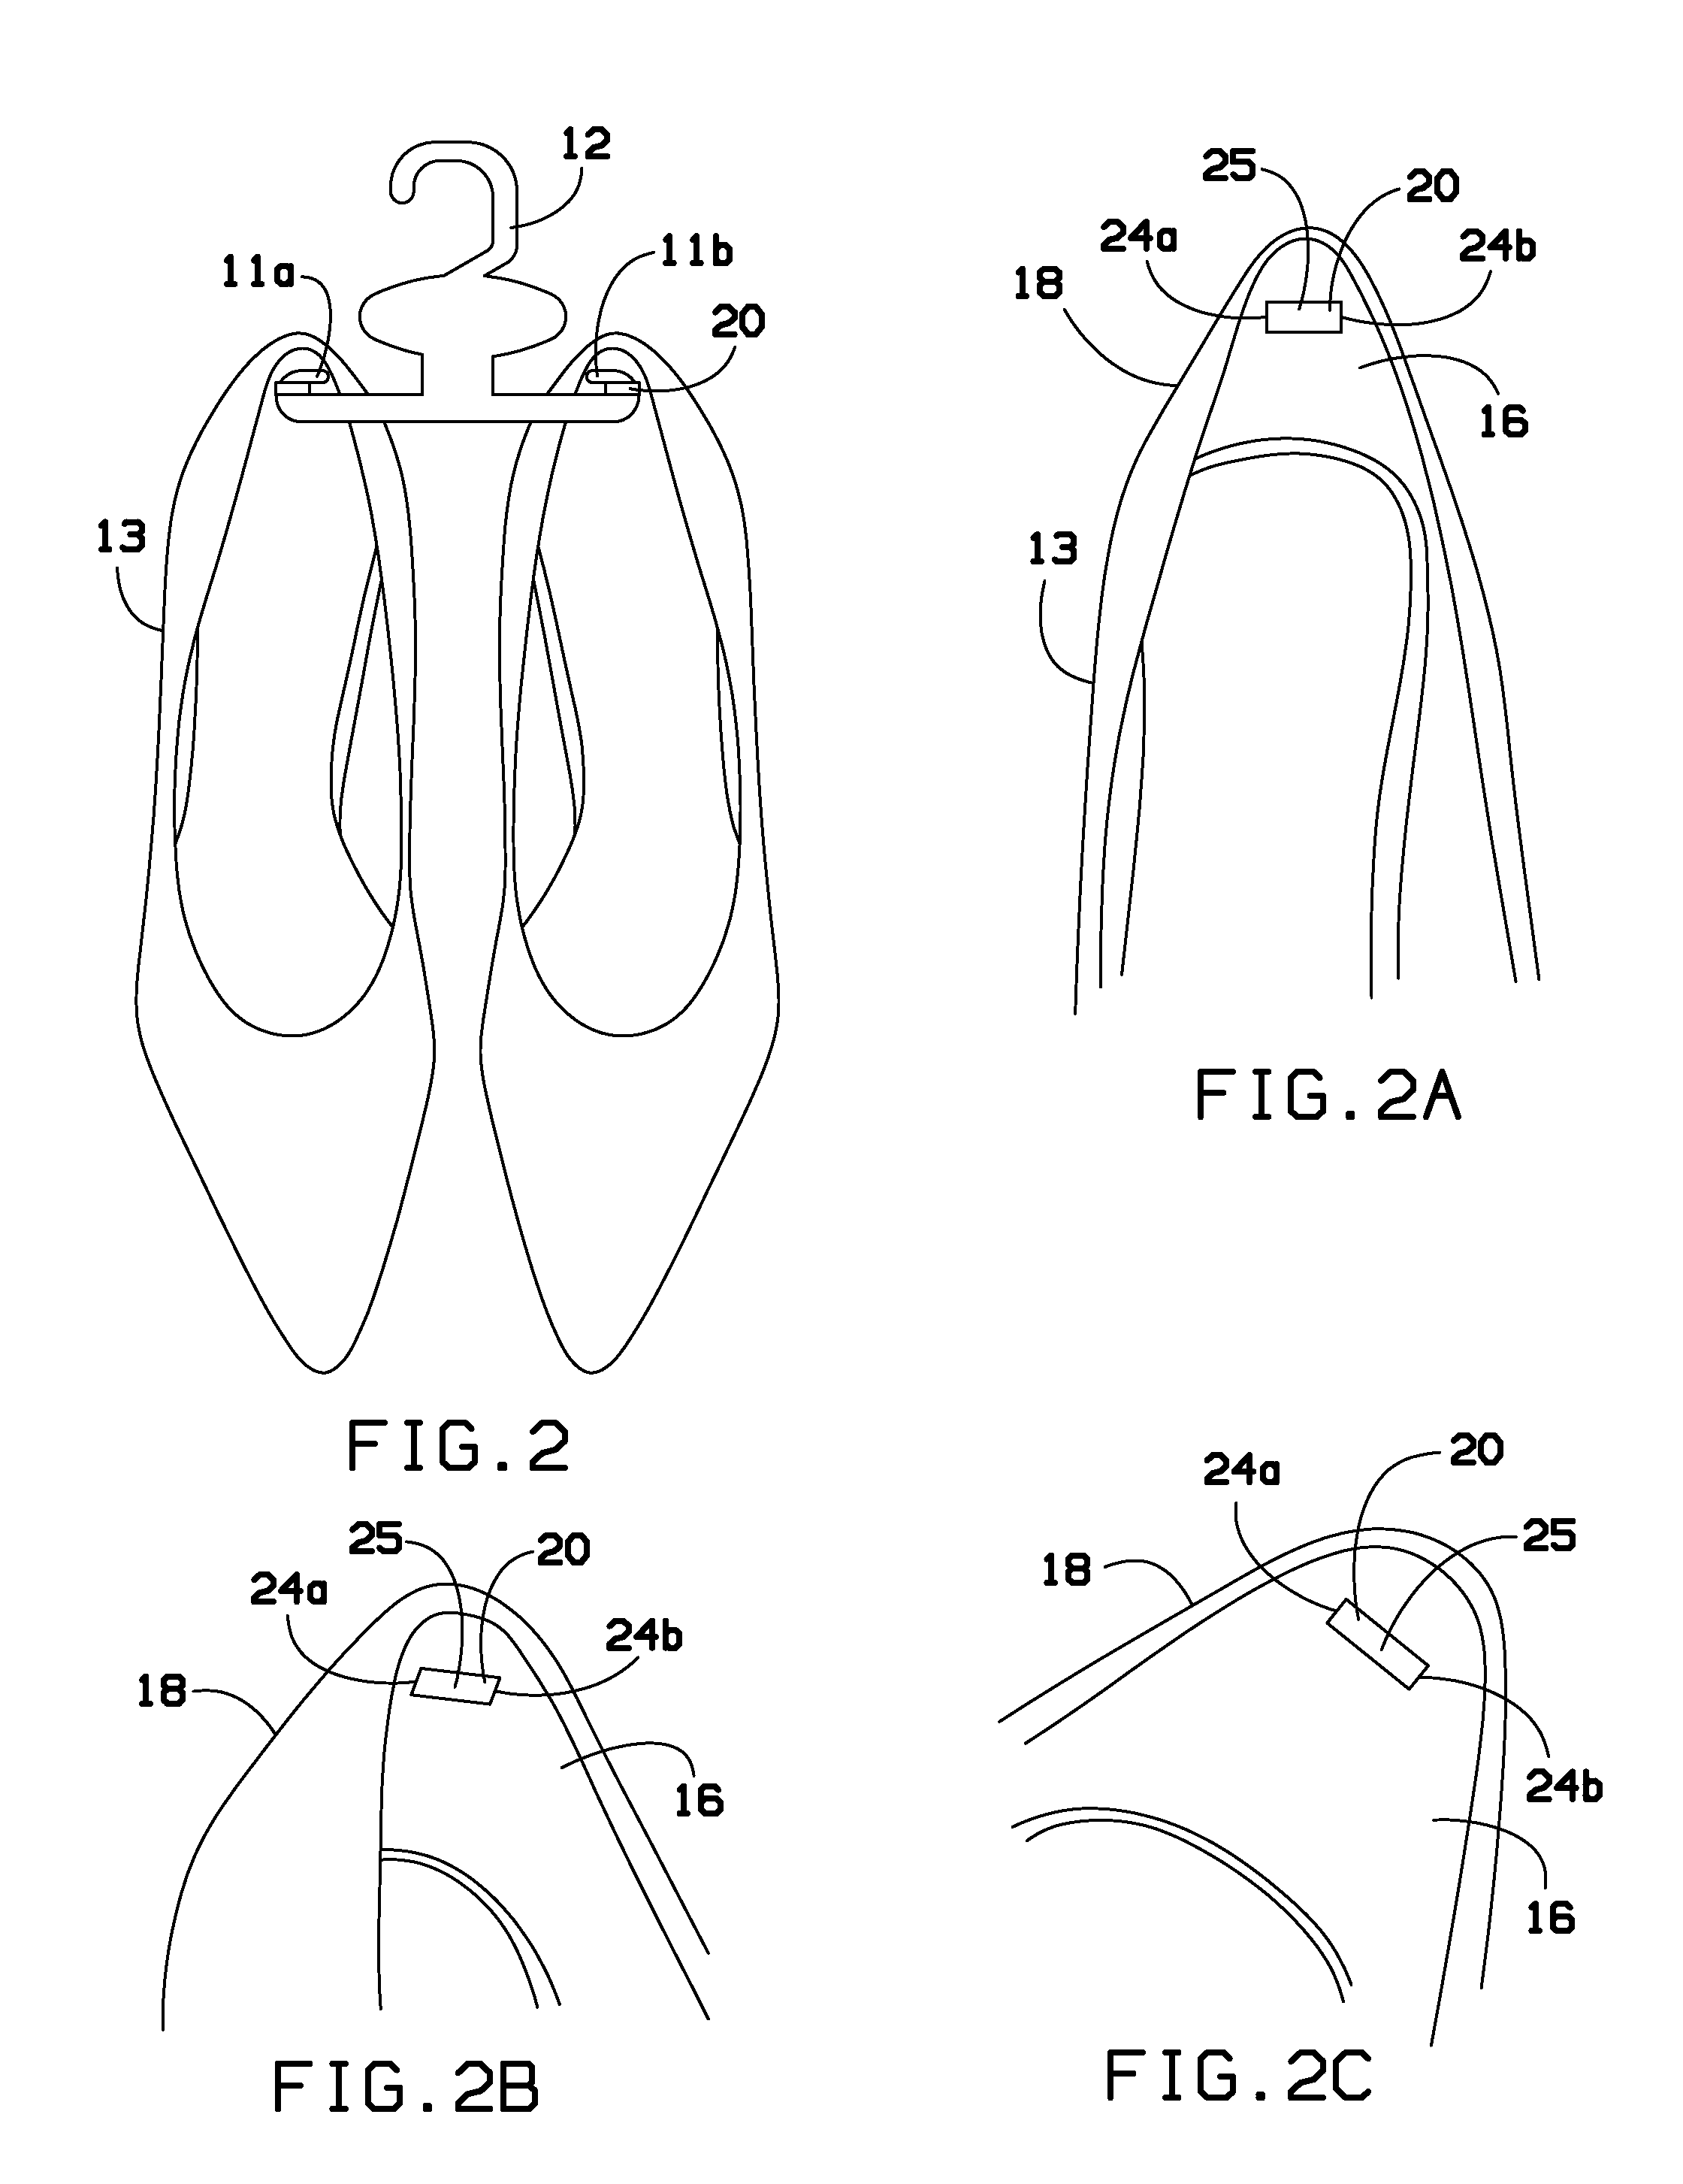 Fabric or elastic heel tab to attach shoes with heels to display hangers